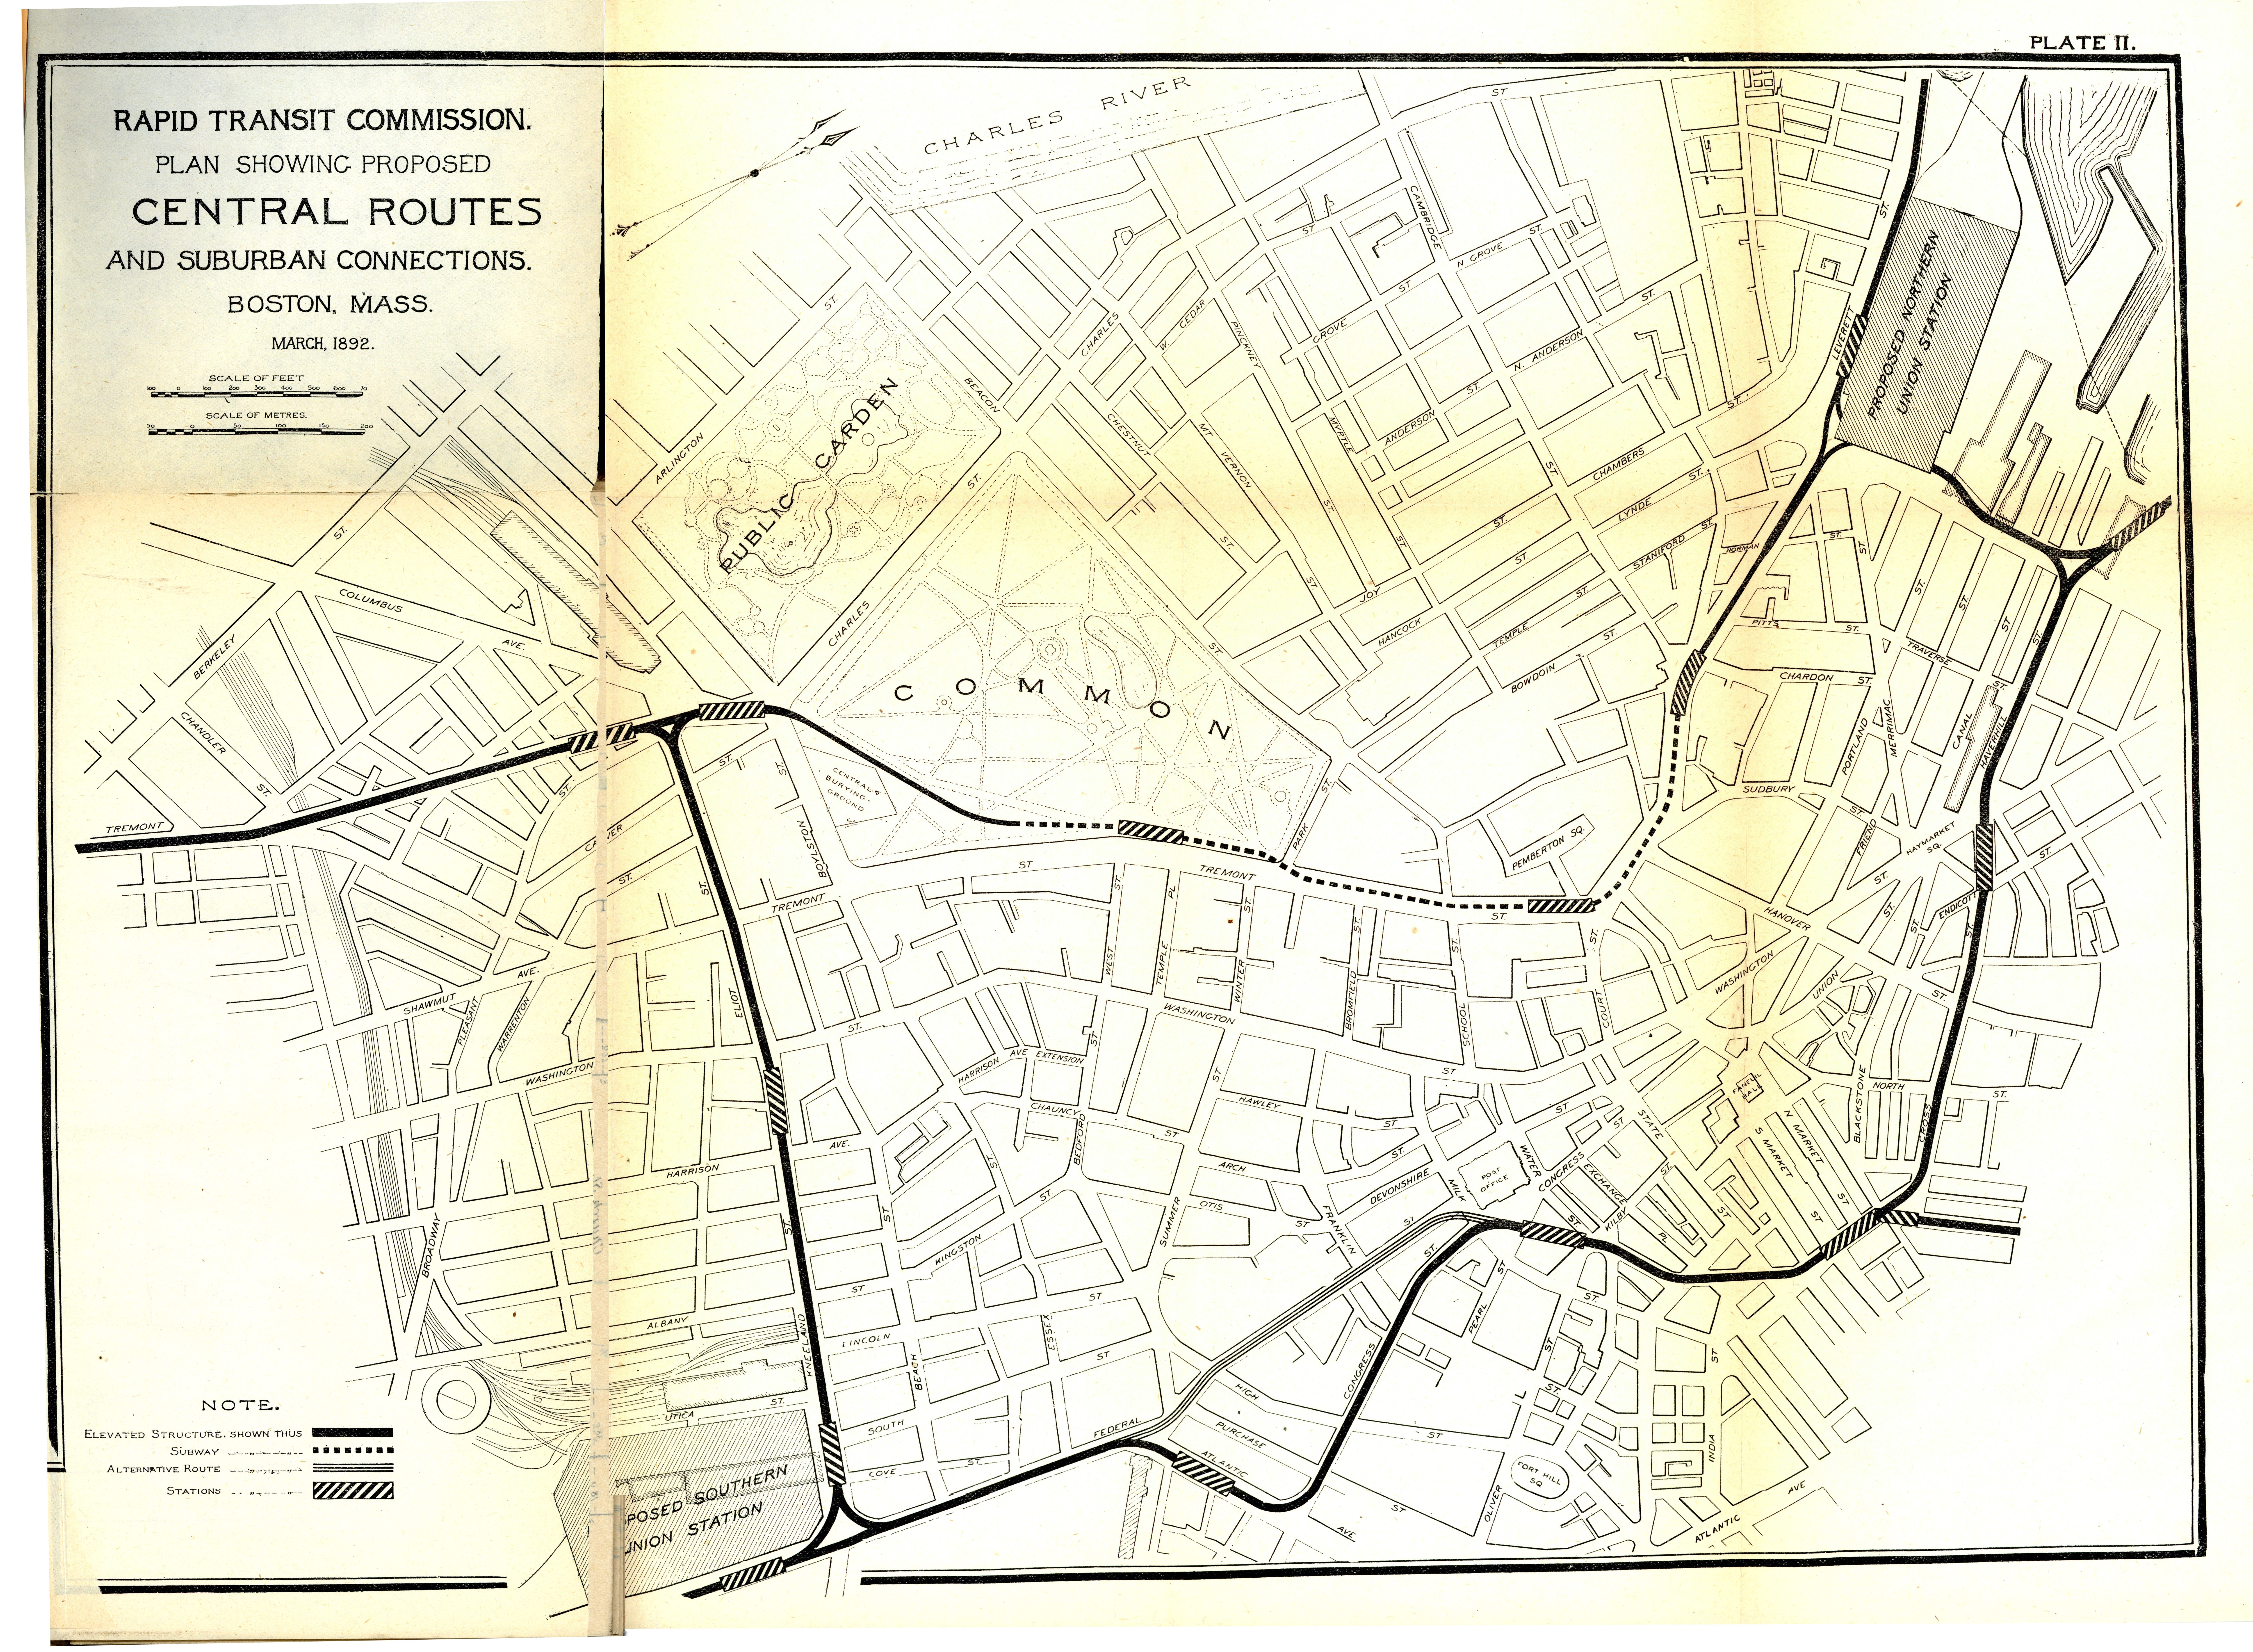 Image of “Plan Showing Proposed Central Routes and Suburban Connections” from “Report of the Rapid Transit Commission to the Massachusetts Legislature”